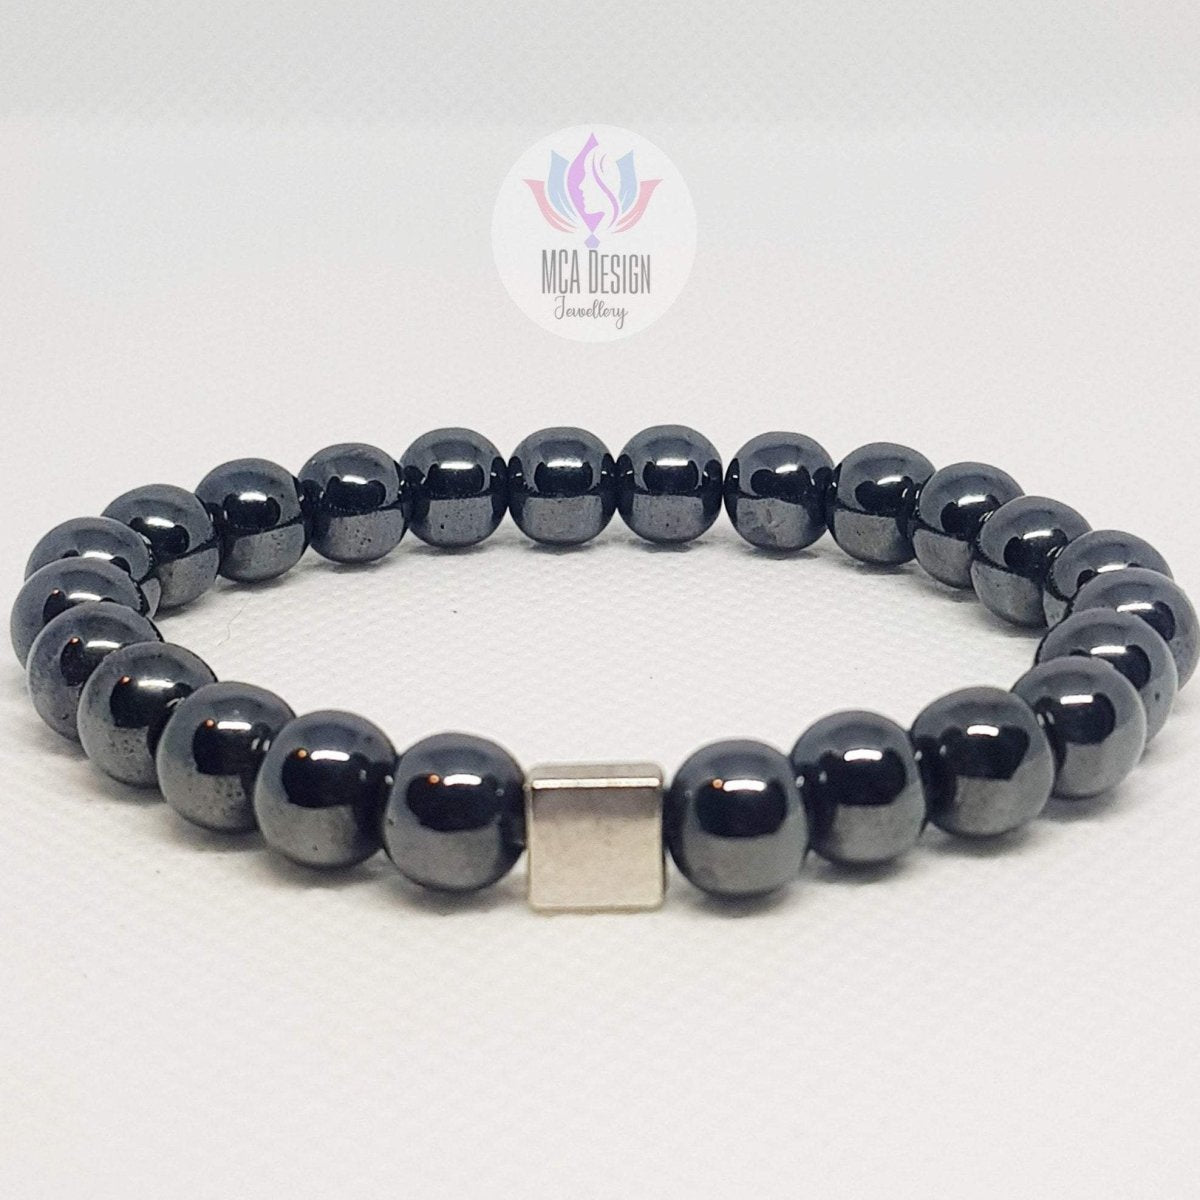 Black Hematite Bracelet with Sterling Silver Spacer - MCA Design by Maria